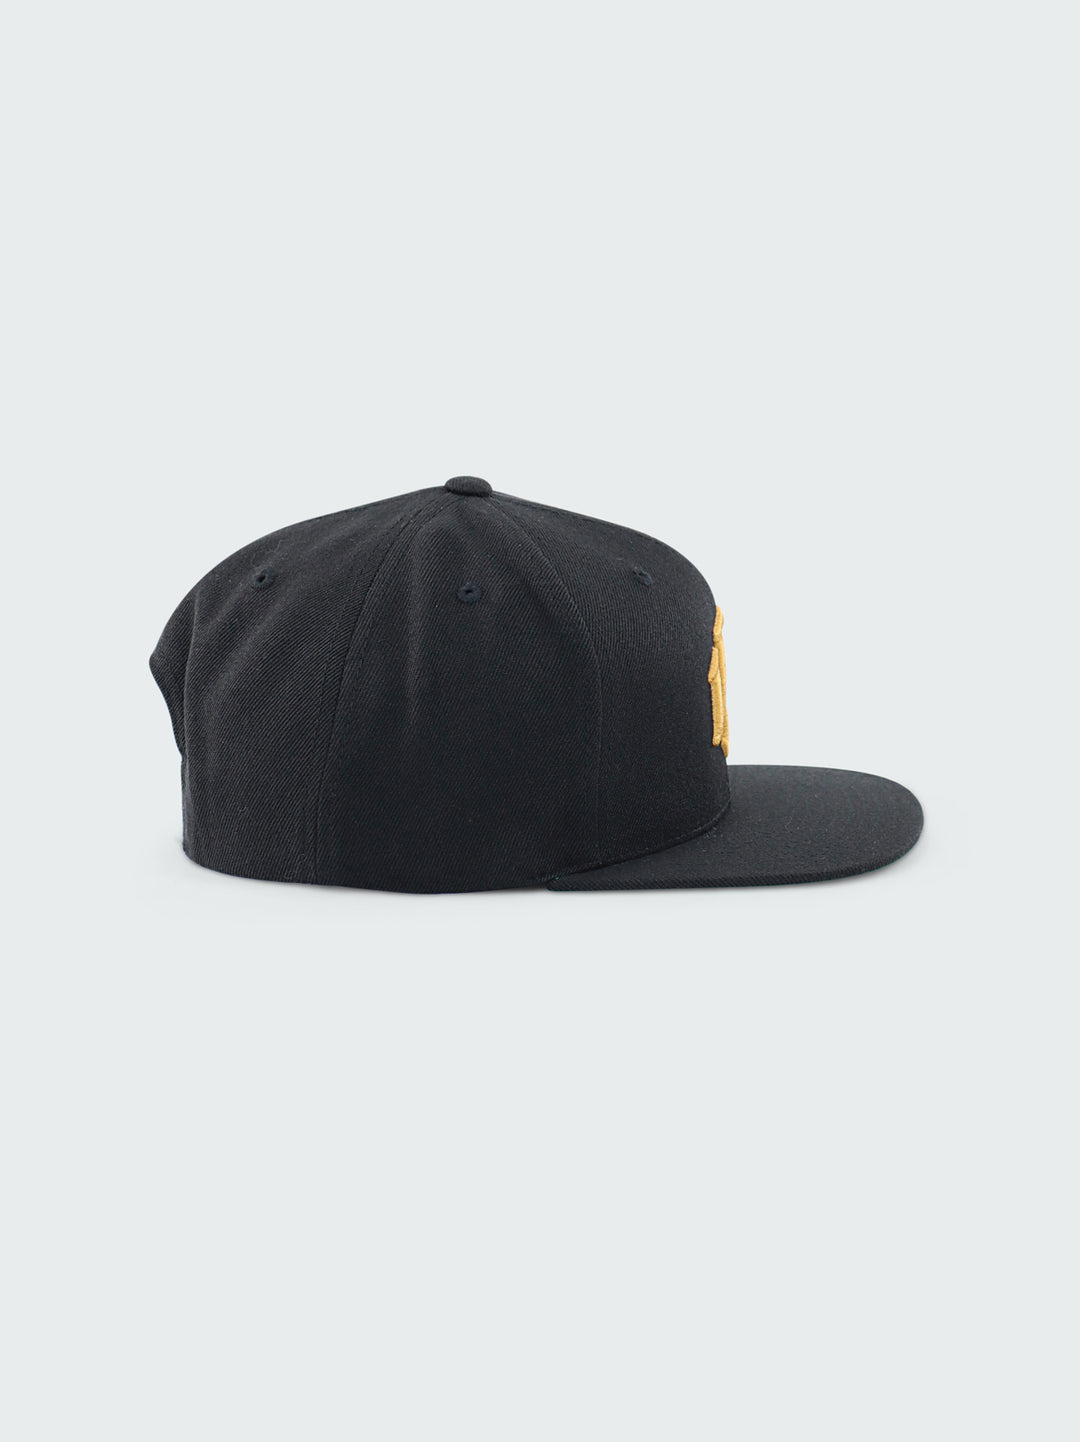 Black Snapback Cap by RENOWNED WEAR featuring a Gold 3D Embroidered front logo